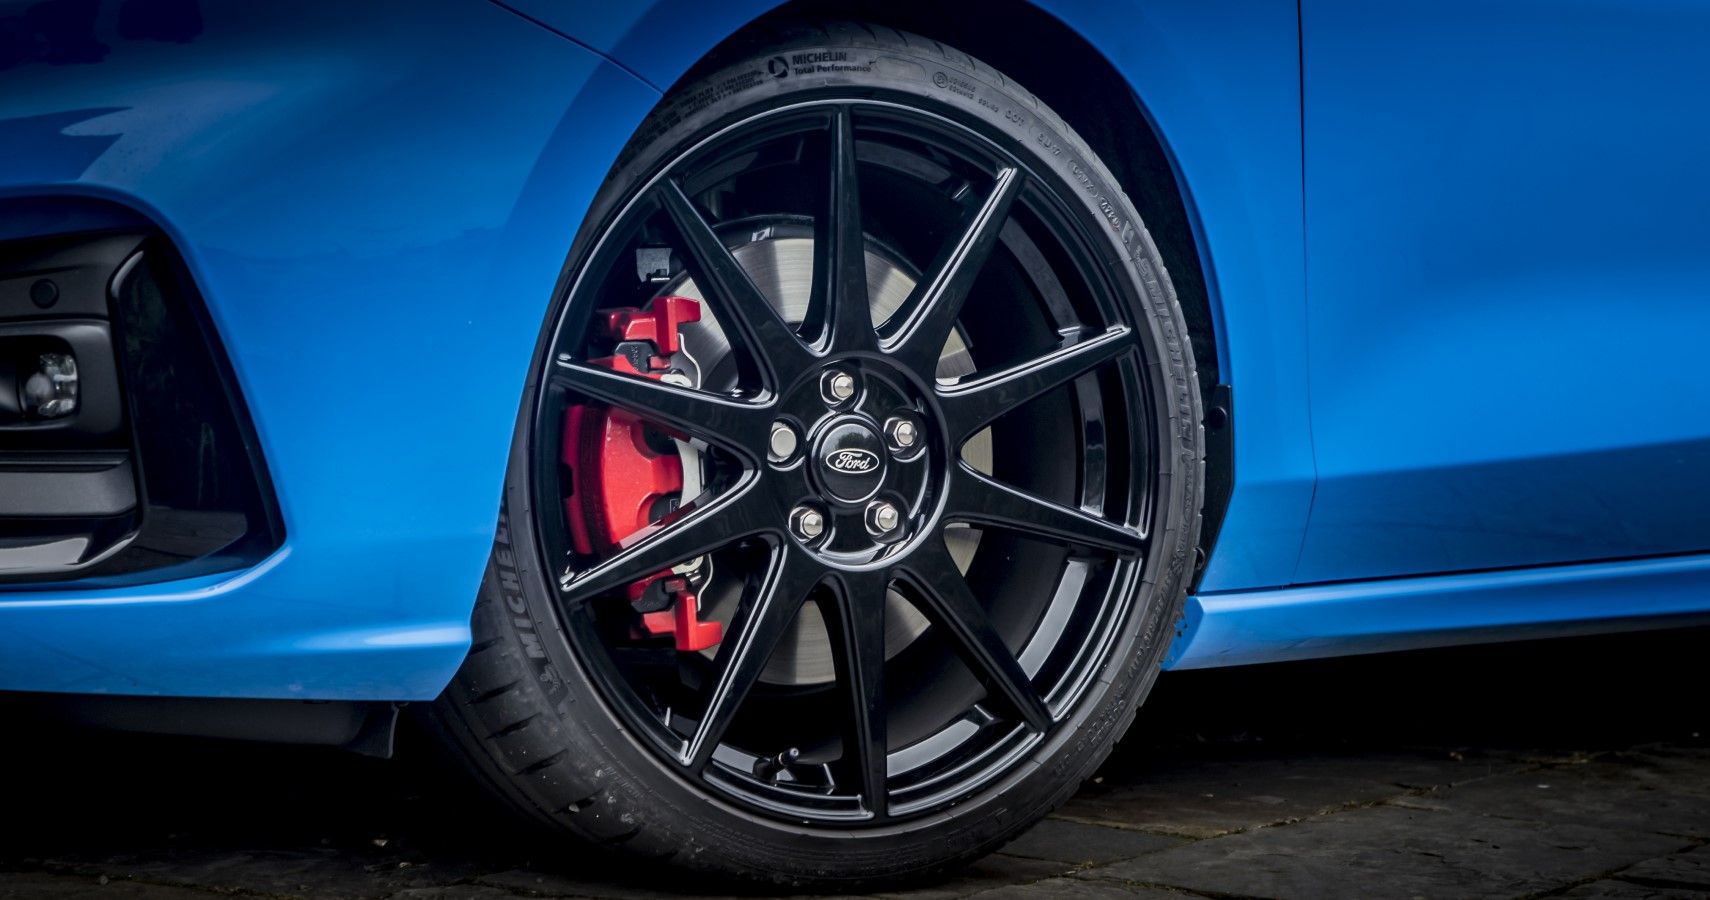 Ford Focus ST Edition wheels close-up view